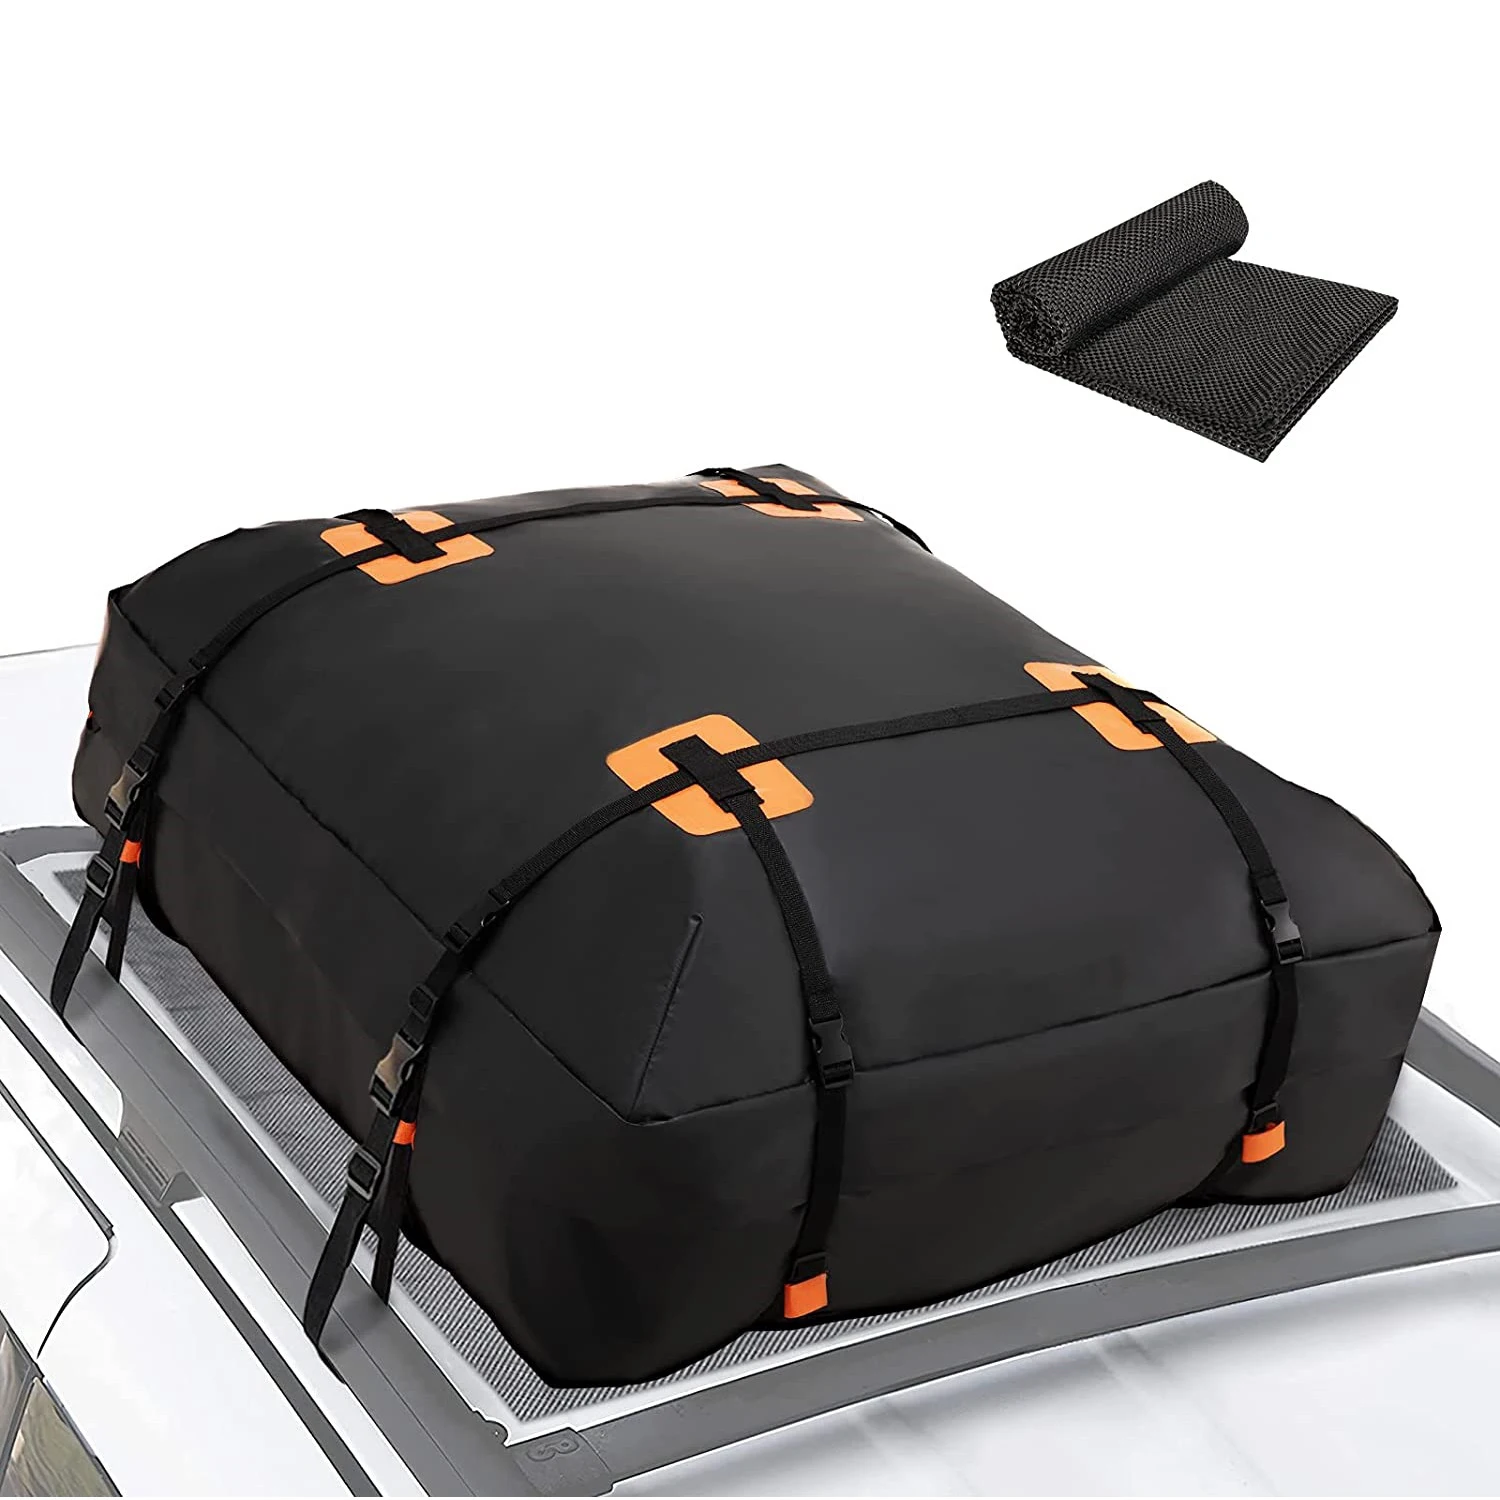 15 Cubic Feet Waterproof Rooftop Bag Travel Storage Luggage Soft-shell All Cars Vans And Suv Car Roof Bag Cargo Carrier - Buy Car Roof Bag Cargo Carrier,15 Cubic Feet Waterproof